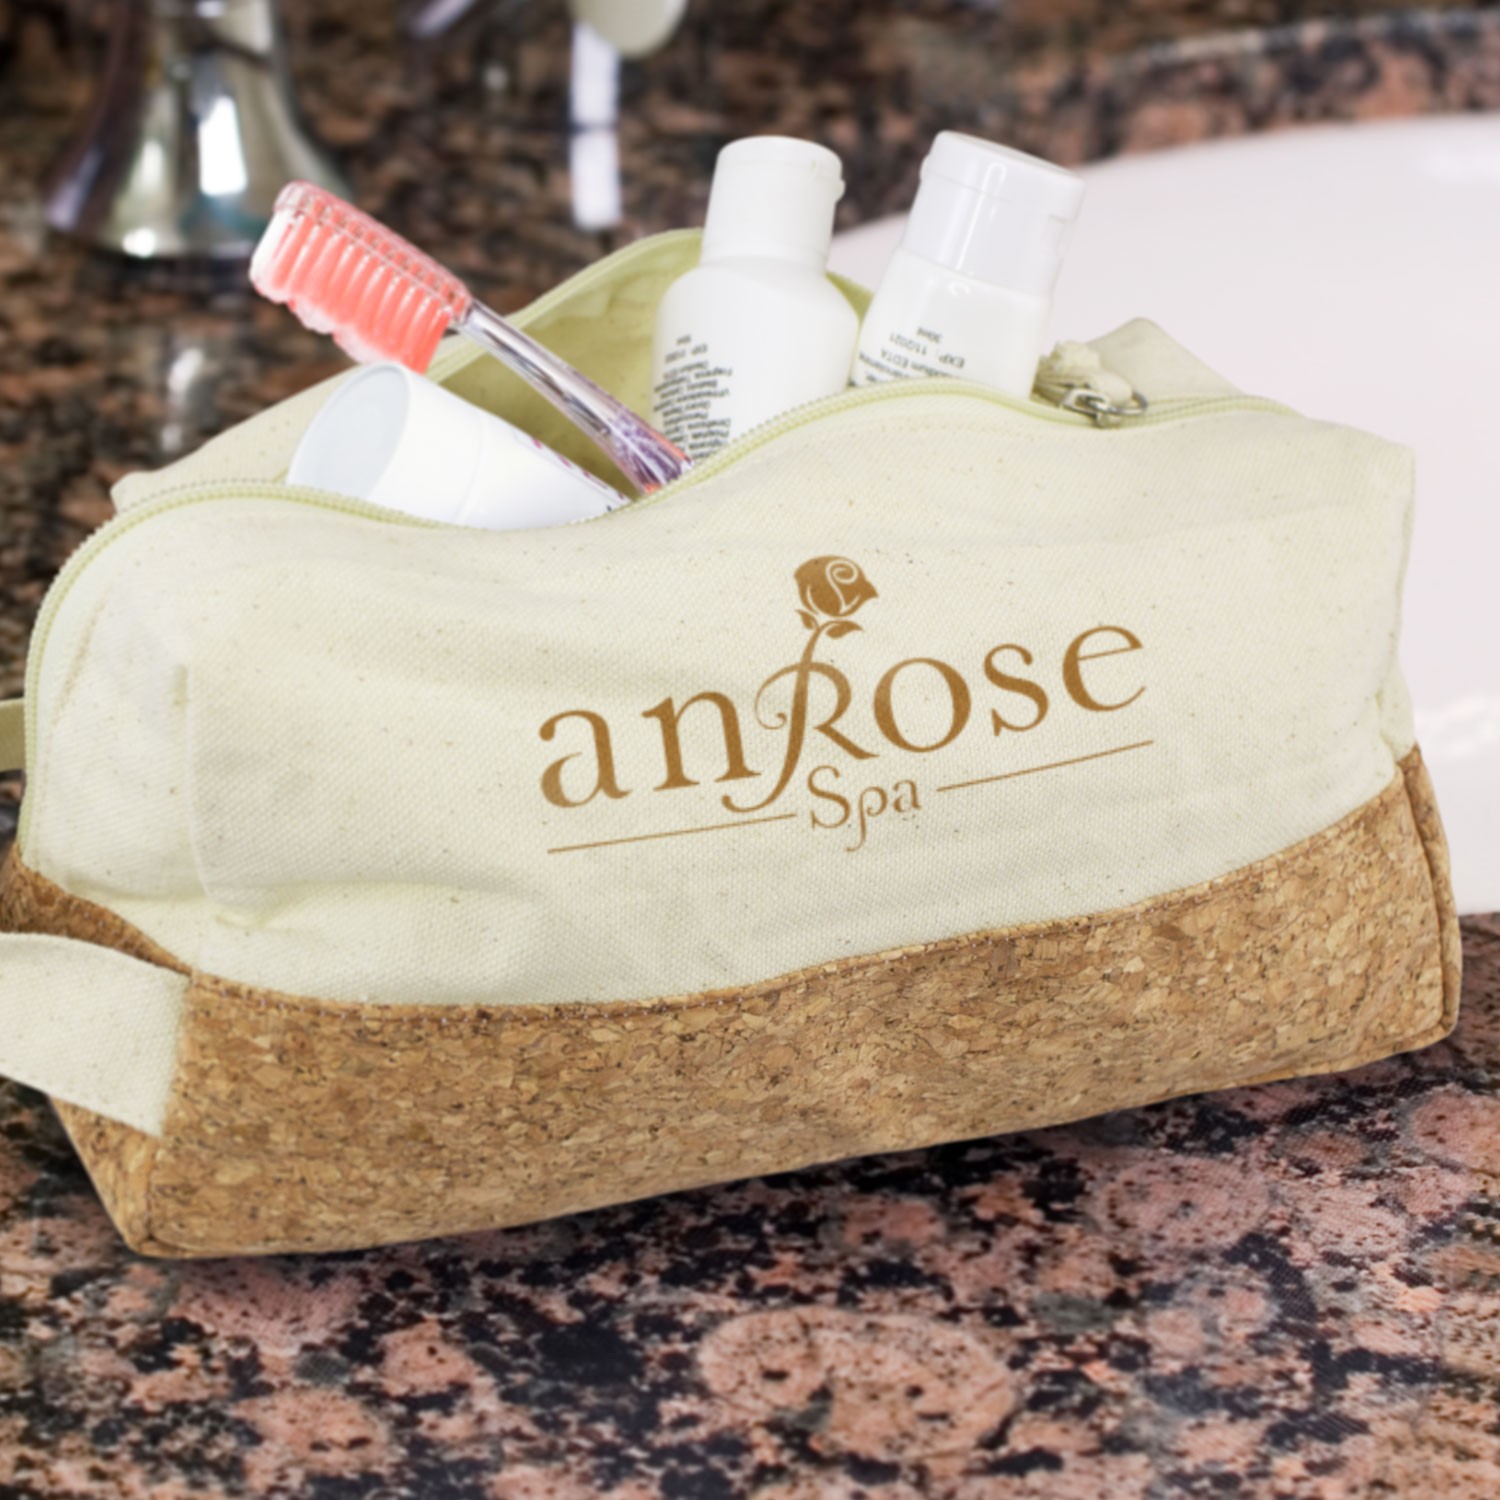 Lery Cork Accent Toiletry Bags